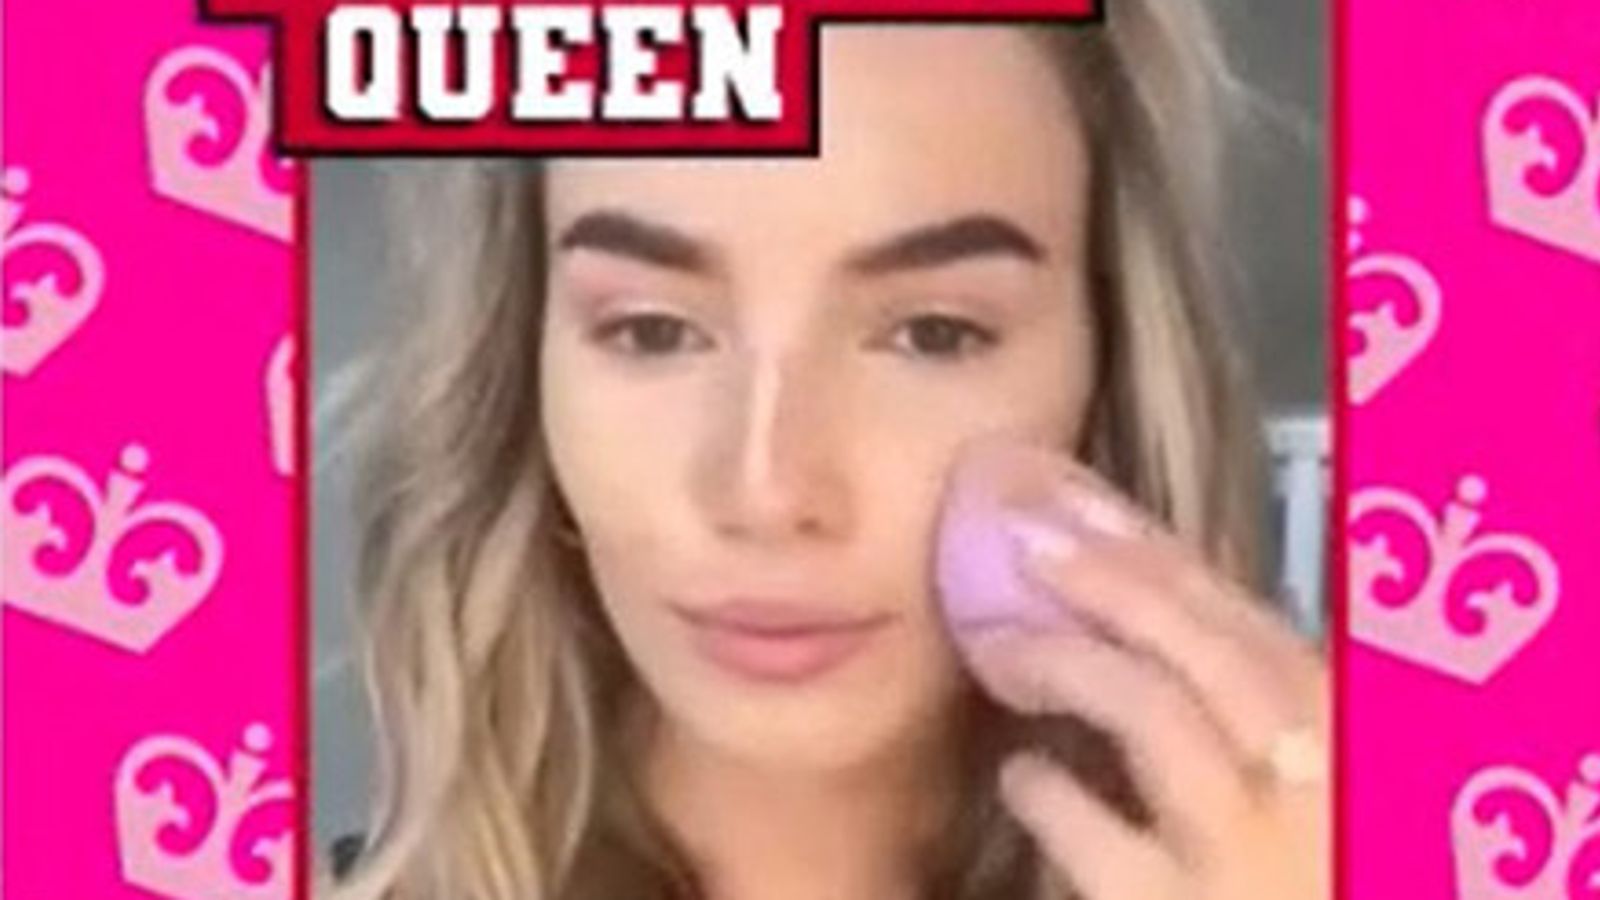 Rimmel London advert banned for implying girls need make-up to succeed